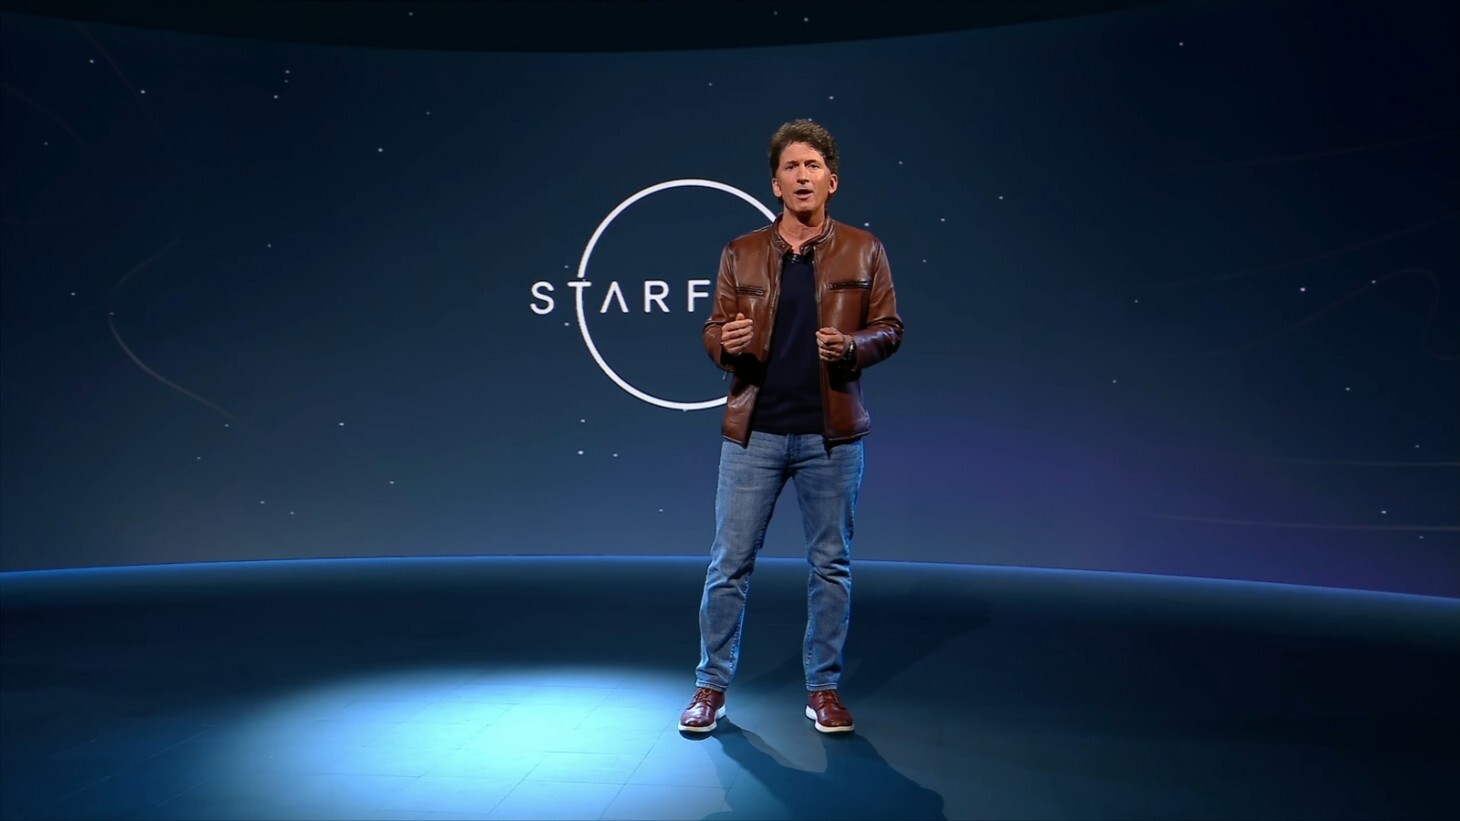 Todd Howard Urges Starfield Players to Upgrade Their PCs for an Unparalleled Gaming Experience